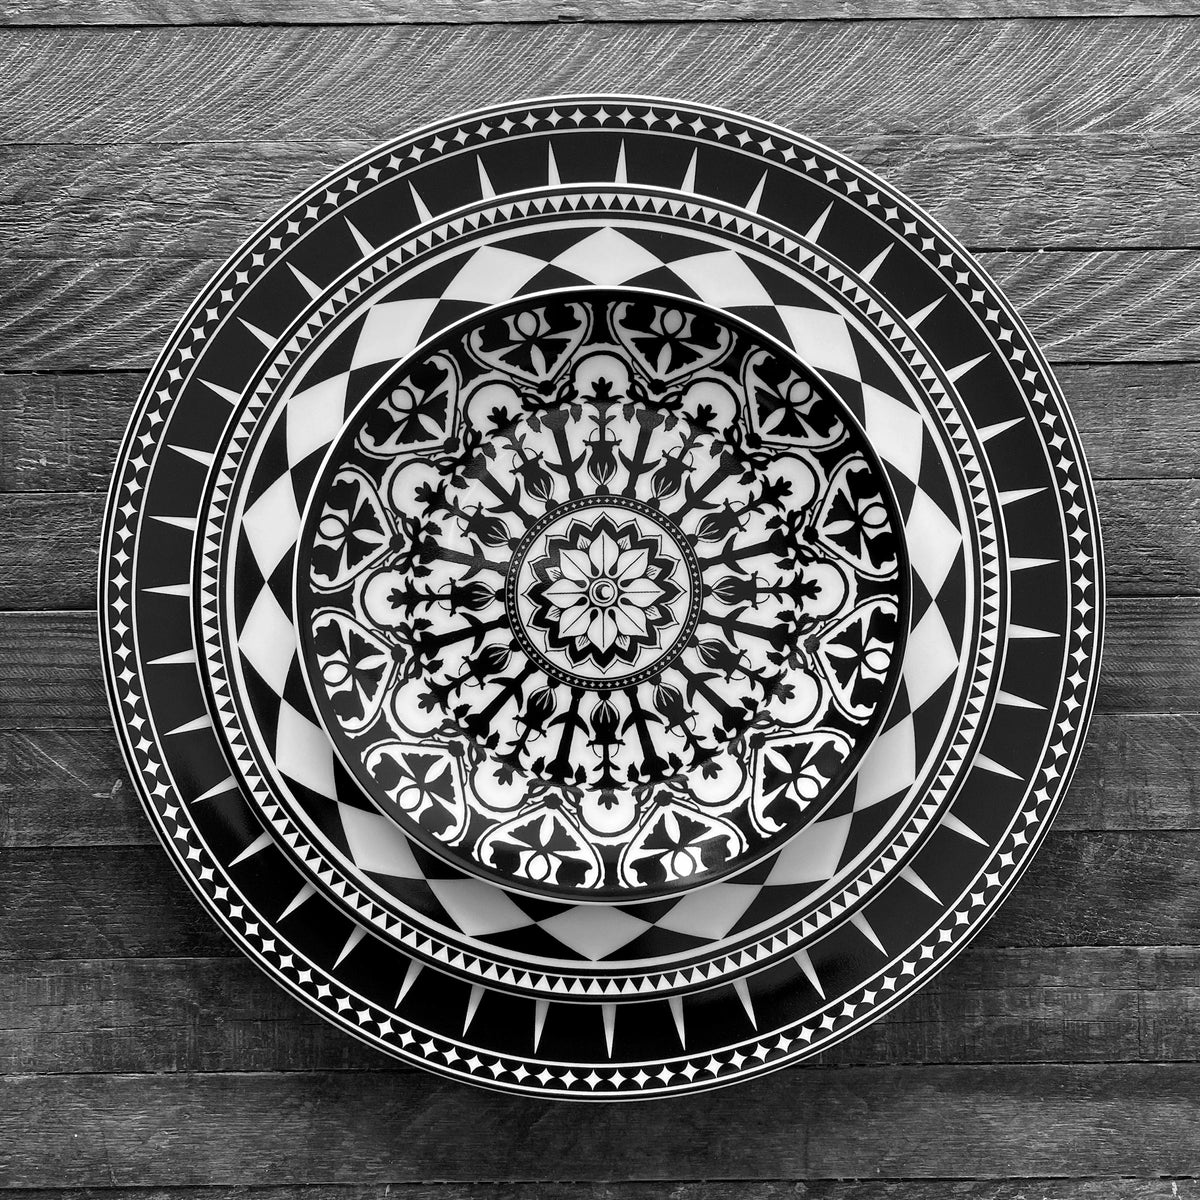 An artistic Marrakech Black Rimmed Dinner Plate captures an exquisite display of Art Deco forms on a simple wooden table by Caskata Artisanal Home.